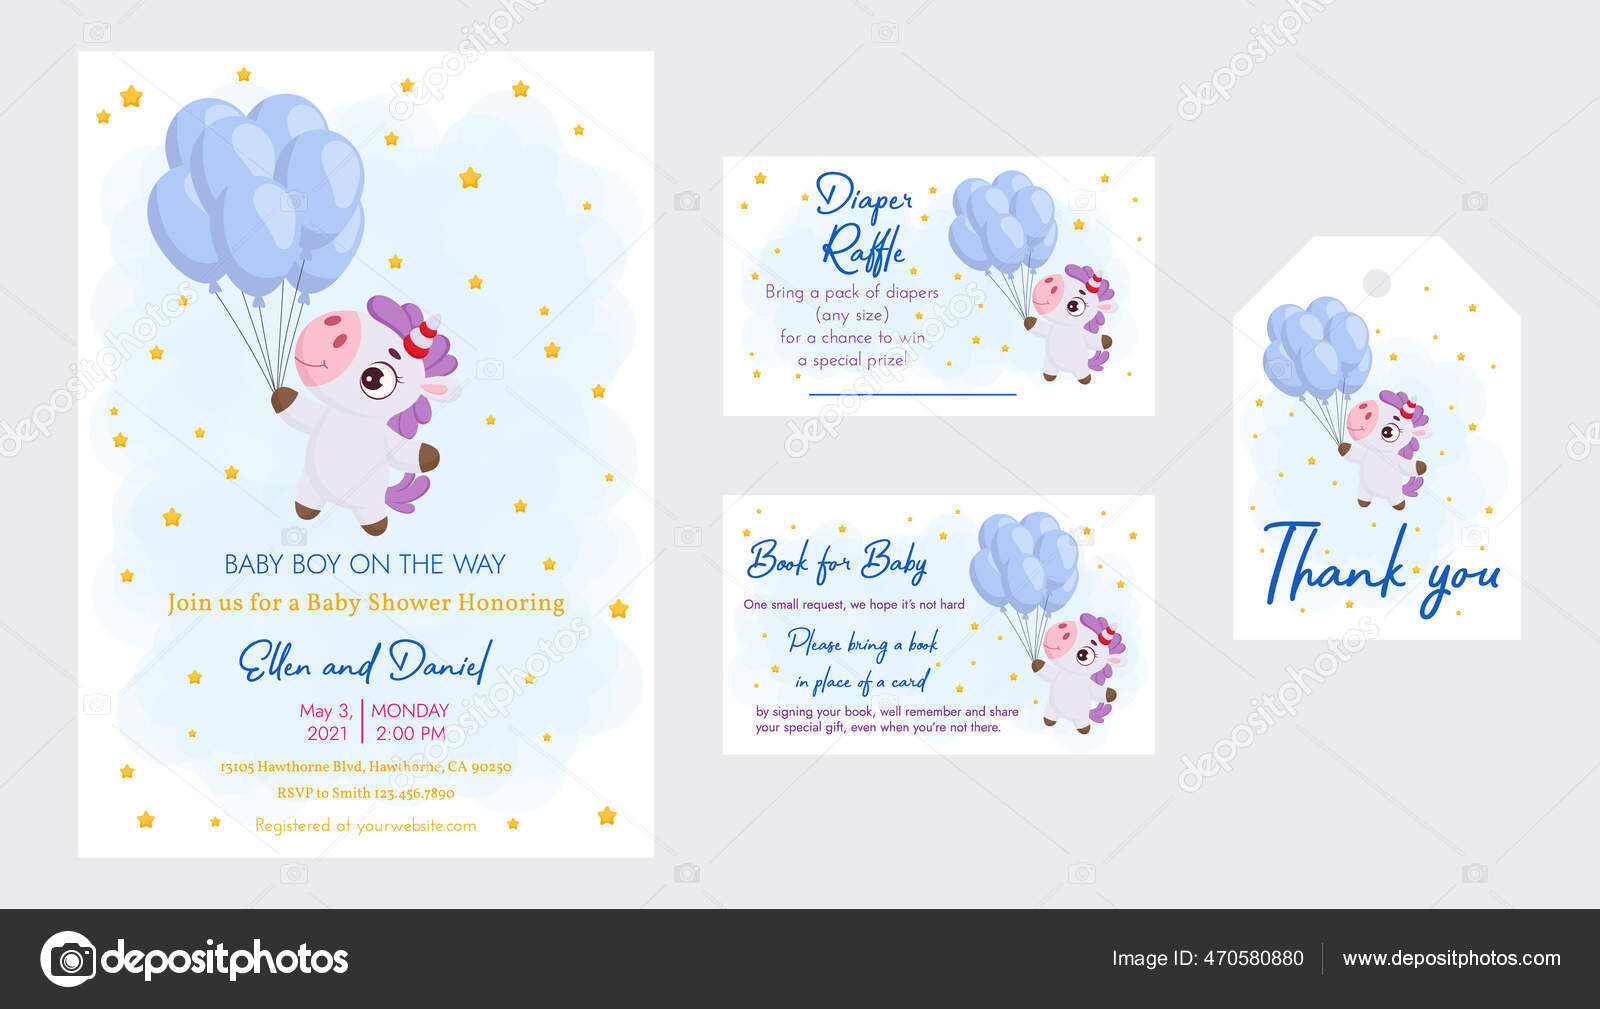 Baby Shower Printable Party Invitation Card Template Baby Boy Way Stock Vector Image By C Valentyna92 470580880